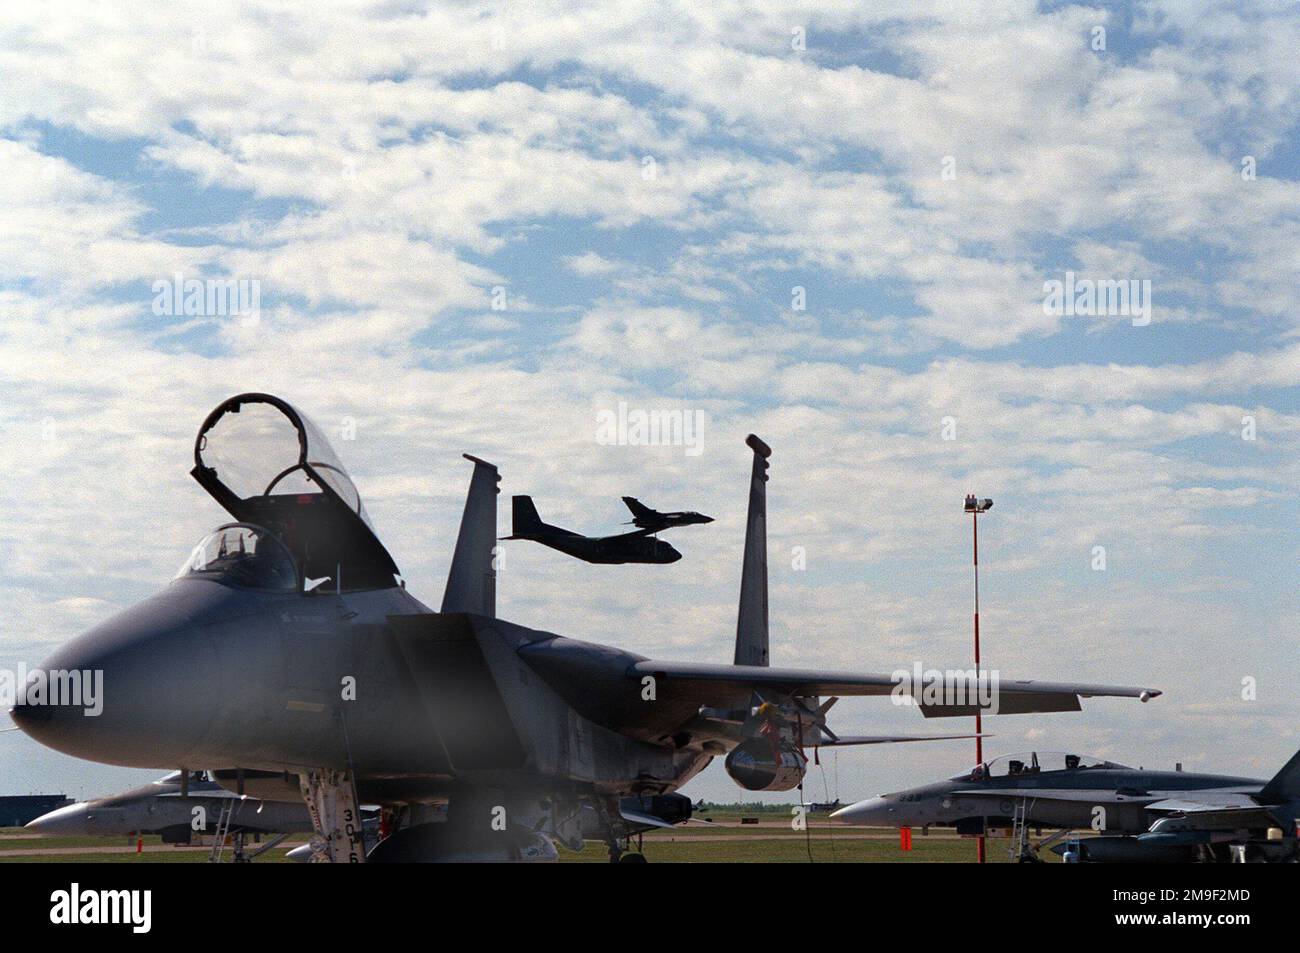 A US Air Force F-15 Eagle (Foreground), from the 173rd Fighter Wing, Kingsley Field, Klamath Falls, Oregon, waits quietly for its next mission, while in the background a Canadian Forces F-16 Falcon taxis behind the F-15. In the air and in the background are a Transall C-160 Cargo plane and a MFG 2 Tornado flown by the German Air Force. The 173rd Fighter Wing was one of the many bases deployed in May 2000 for the Maple Flag Exercise at 4-Wing Cold Lake, Alberta, Canada. Subject Operation/Series: MAPLE FLAG 2000 Base: 4-Wing Cold Lake State: Alberta (AB) Country: Canada (CAN) Stock Photo